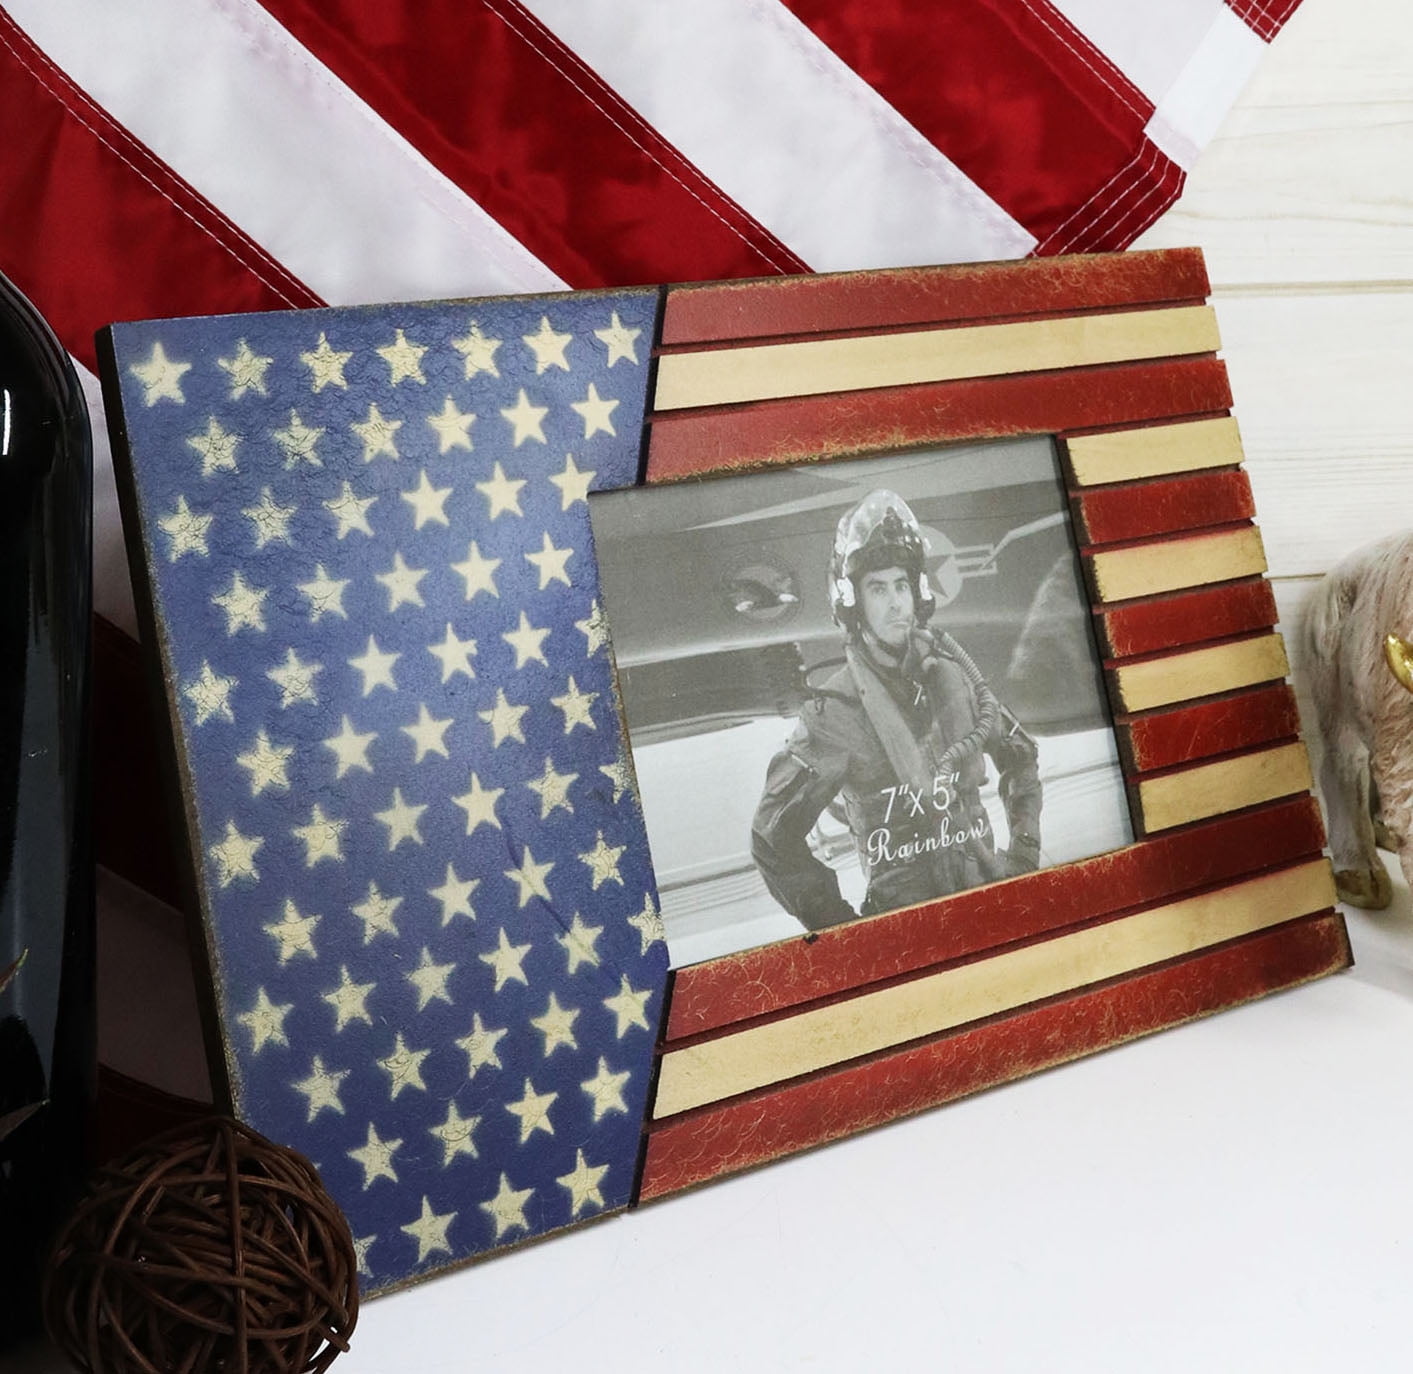 American Flag Hero Independence 4X6 Resin Piture Frame 